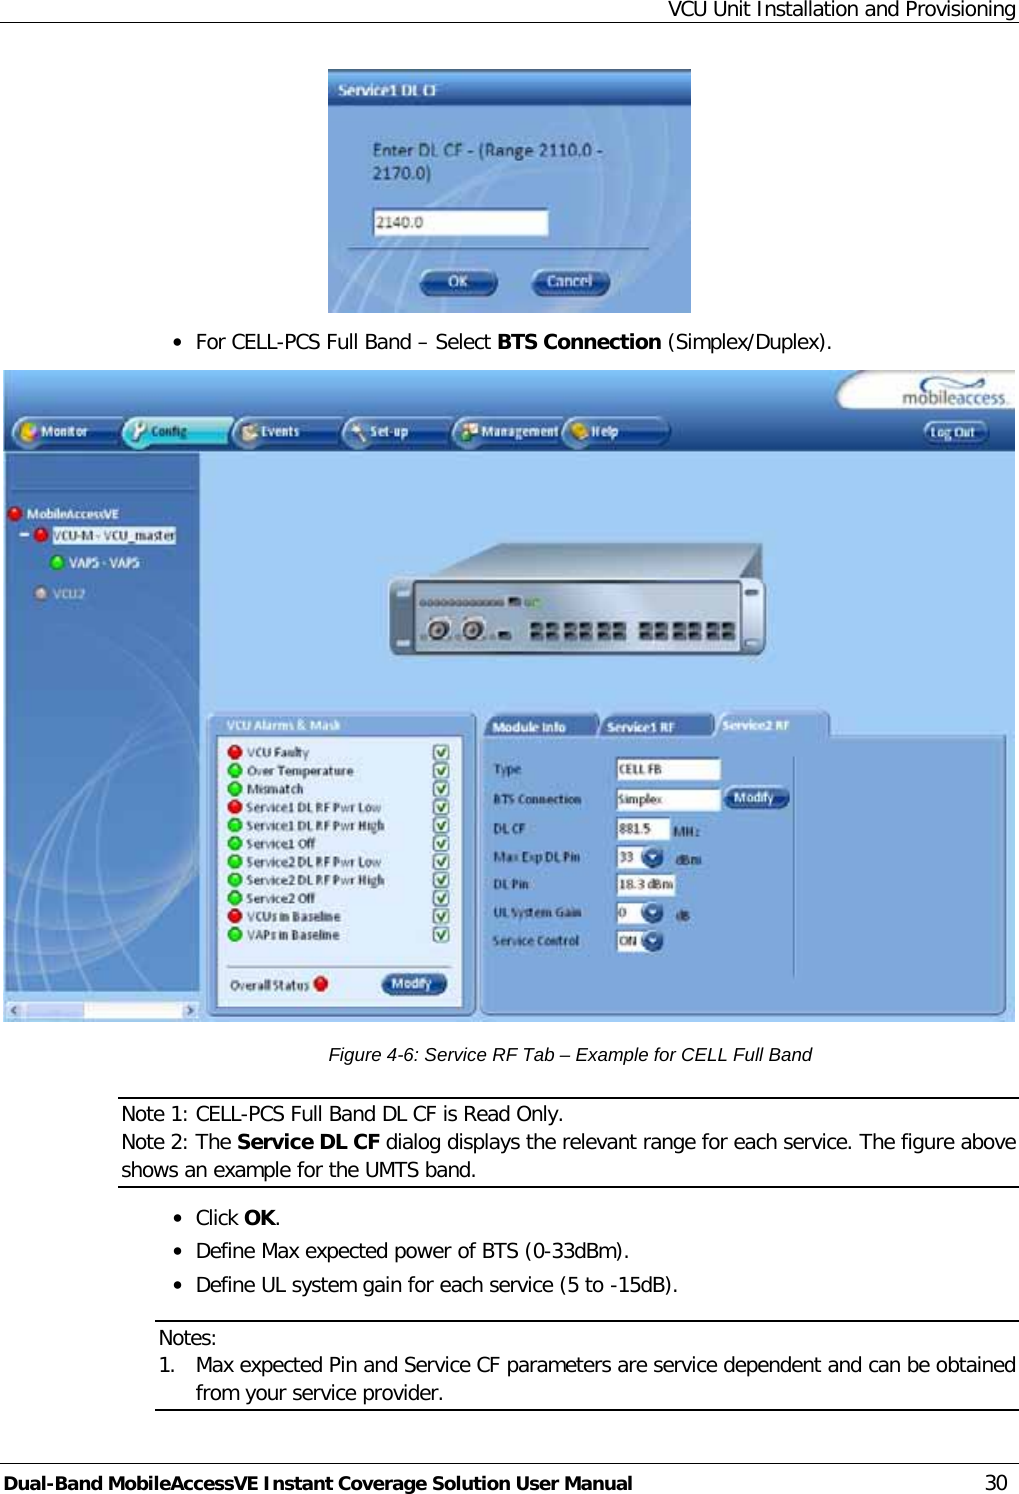 VCU Unit Installation and Provisioning Dual-Band MobileAccessVE Instant Coverage Solution User Manual 30  · For CELL-PCS Full Band – Select BTS Connection (Simplex/Duplex).  Figure  4-6: Service RF Tab – Example for CELL Full Band Note 1: CELL-PCS Full Band DL CF is Read Only. Note 2: The Service DL CF dialog displays the relevant range for each service. The figure above shows an example for the UMTS band. · Click OK. · Define Max expected power of BTS (0-33dBm). · Define UL system gain for each service (5 to -15dB). Notes:  1. Max expected Pin and Service CF parameters are service dependent and can be obtained from your service provider. 